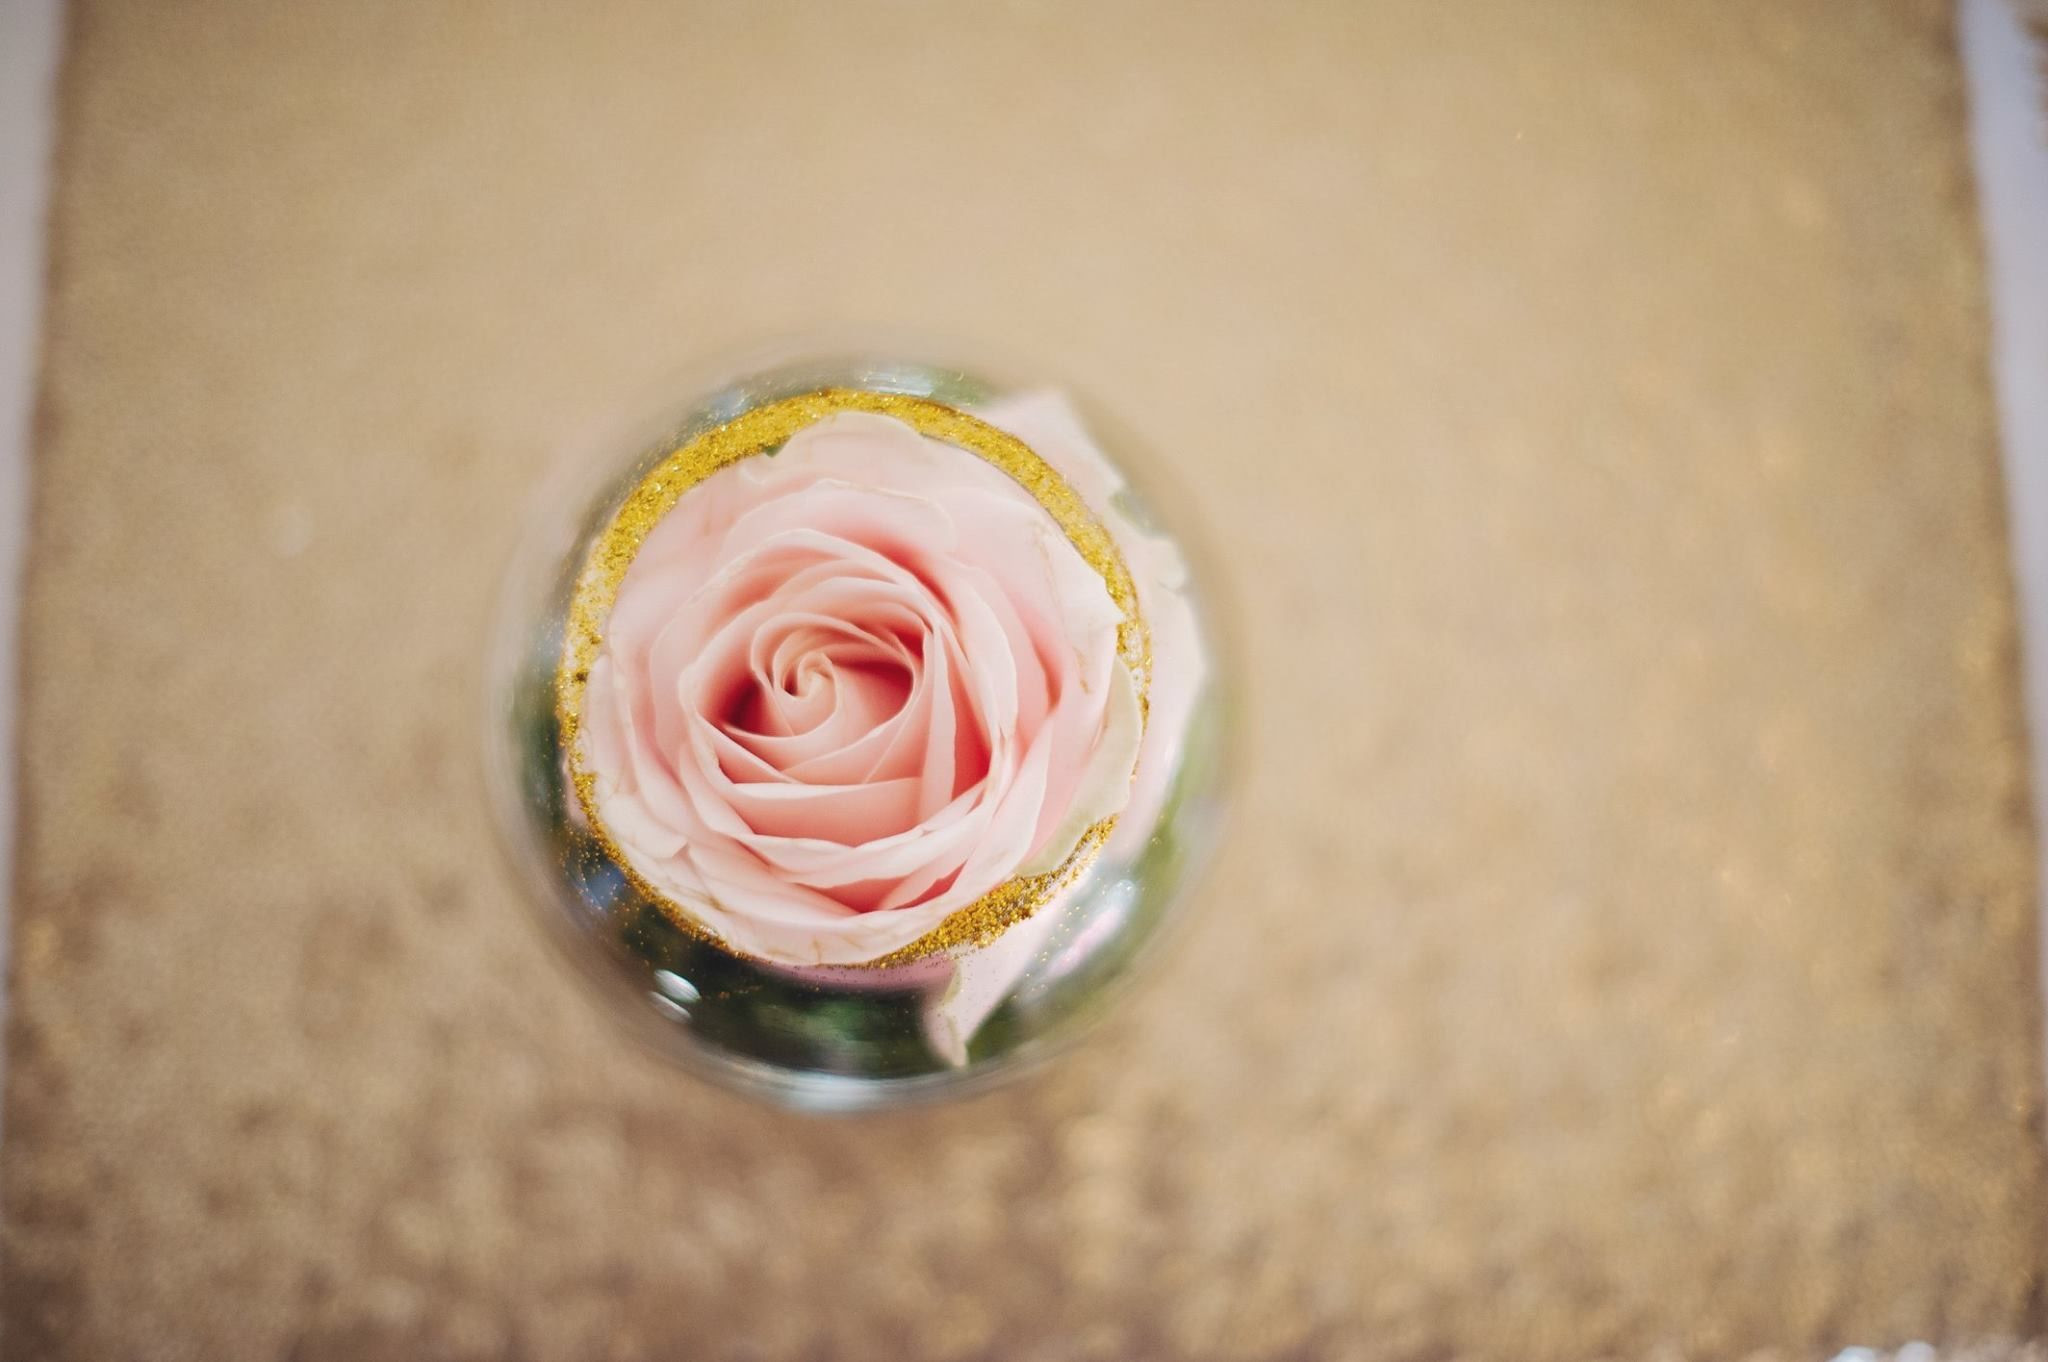 rose gold glitter vase of stunning pale pink rose sitting on a small bed of moss in a bud vase for stunning pale pink rose sitting on a small bed of moss in a bud vase trimmed